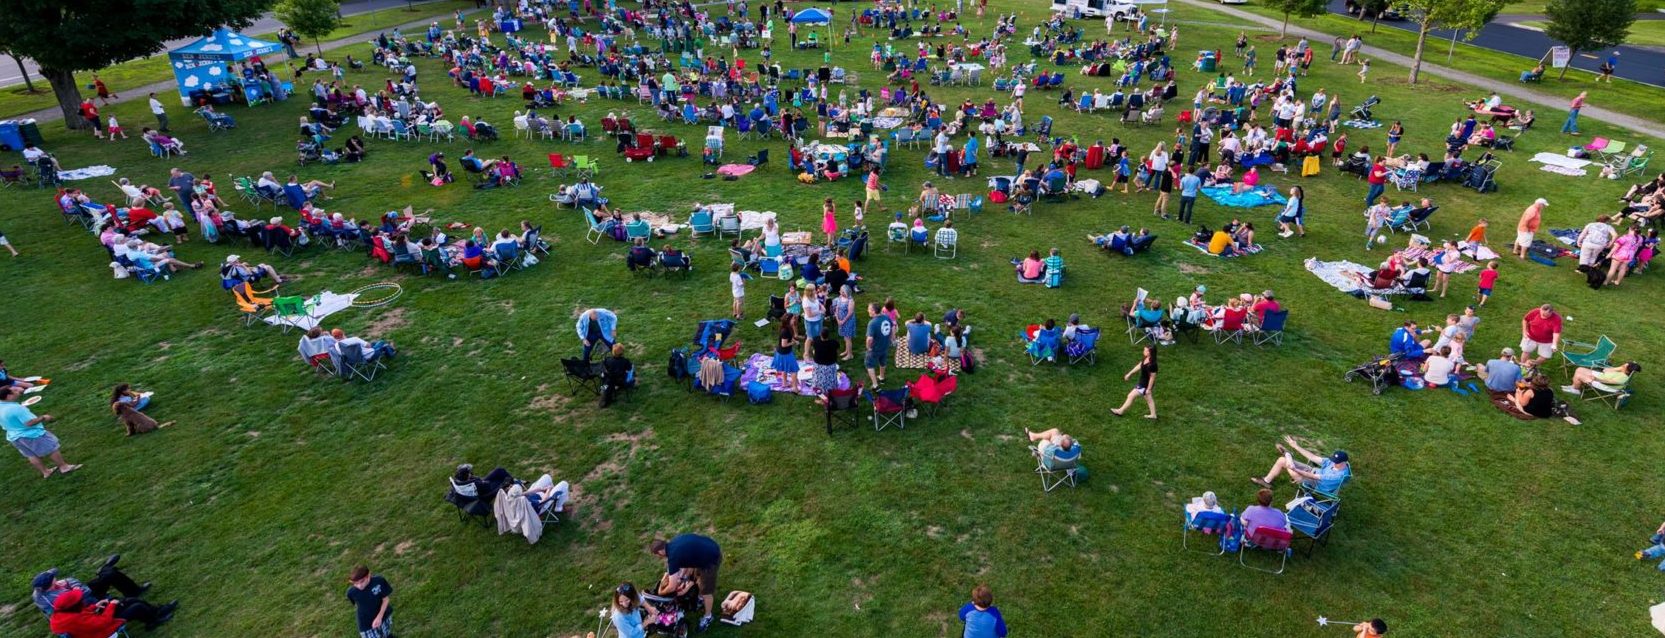 Wide angled areal photograph of an outdoor lawn with many people seated on the lawn.